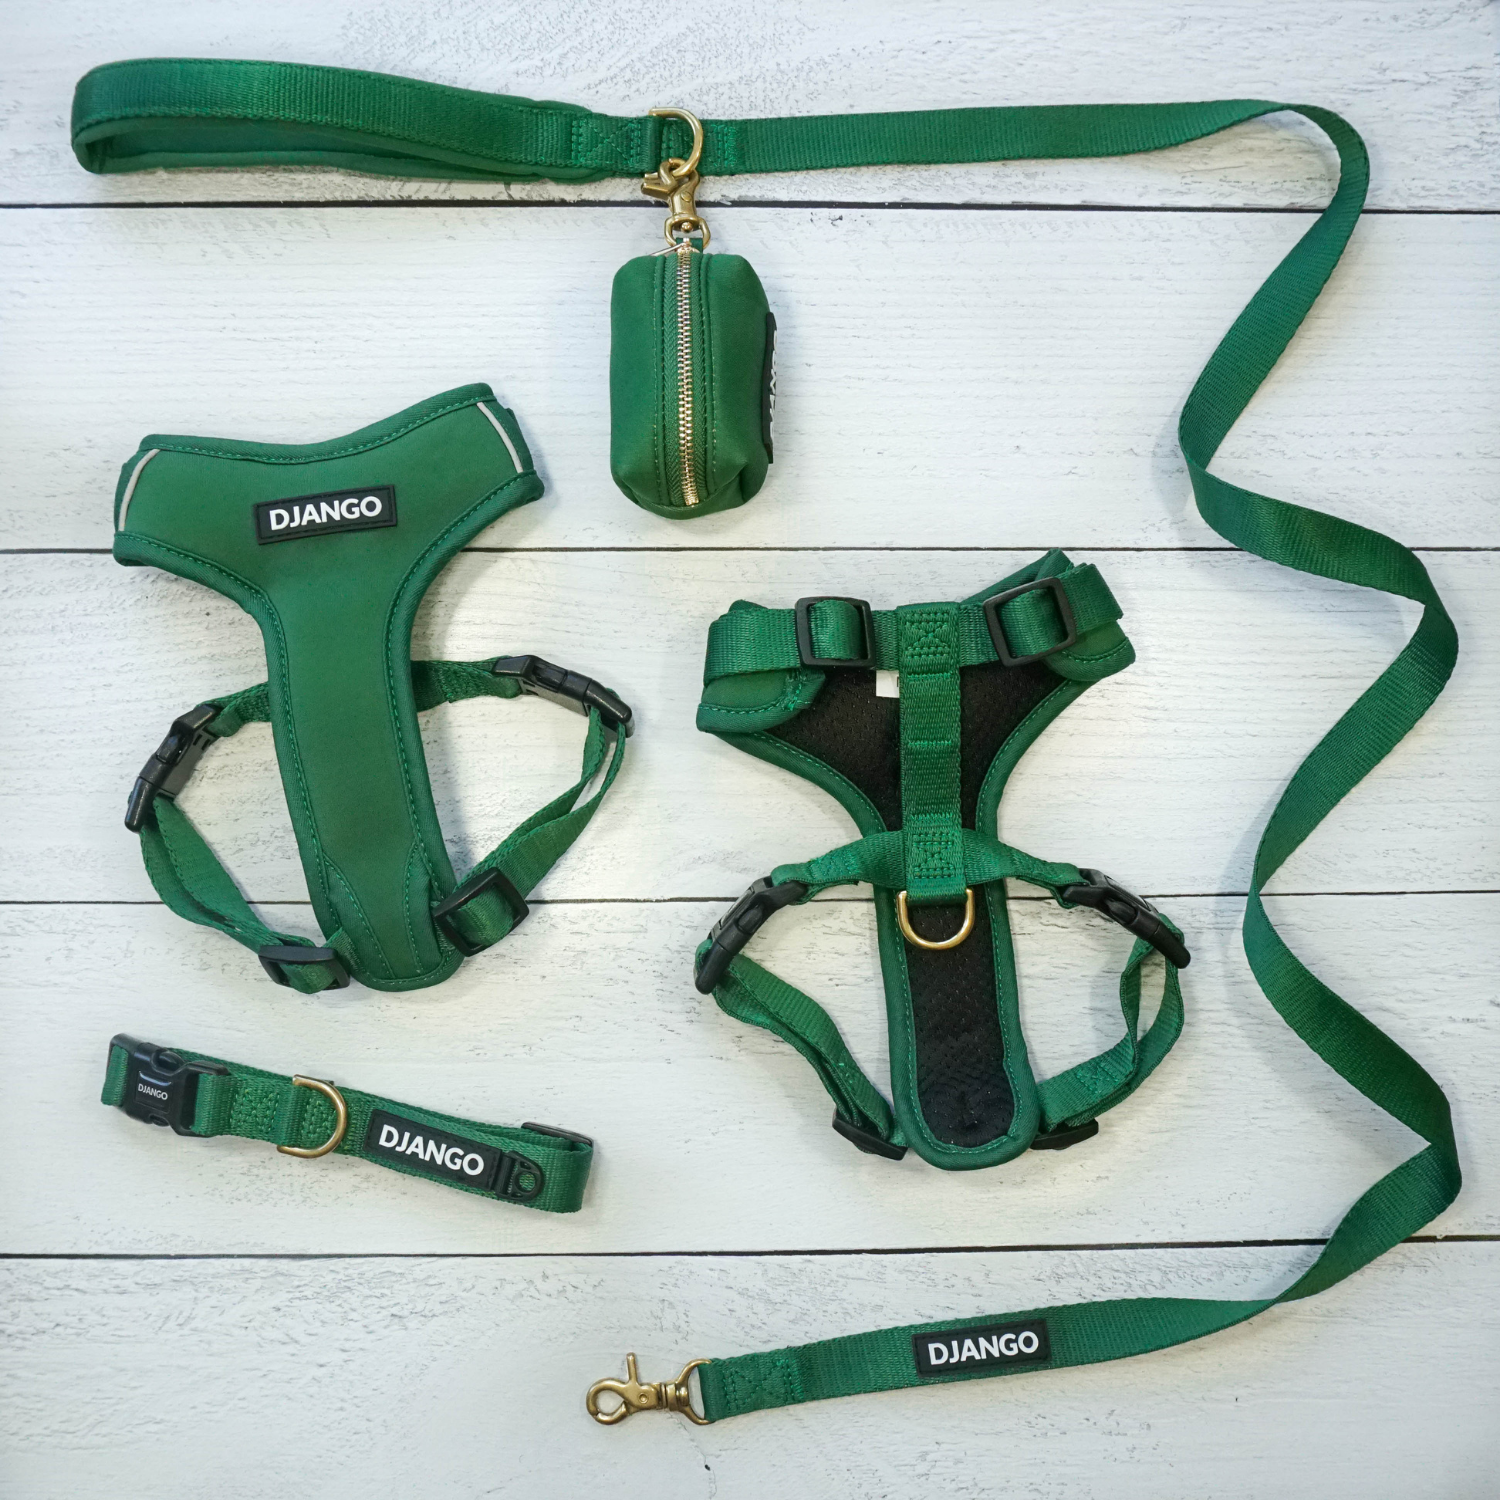 DJANGO Adventure Bundle in Forest Green - The Adventure Bundle includes our comfortable, durable, and weather-resistant Adventure Dog Harness, Adventure Dog Collar, Standard Adventure Dog Leash, and chic Waste Bag Holder. All items feature high-strength and corrosion-resistant solid brass hardware. Save $$$ when you complete your set and order the Adventure Bundle - djangobrand.com